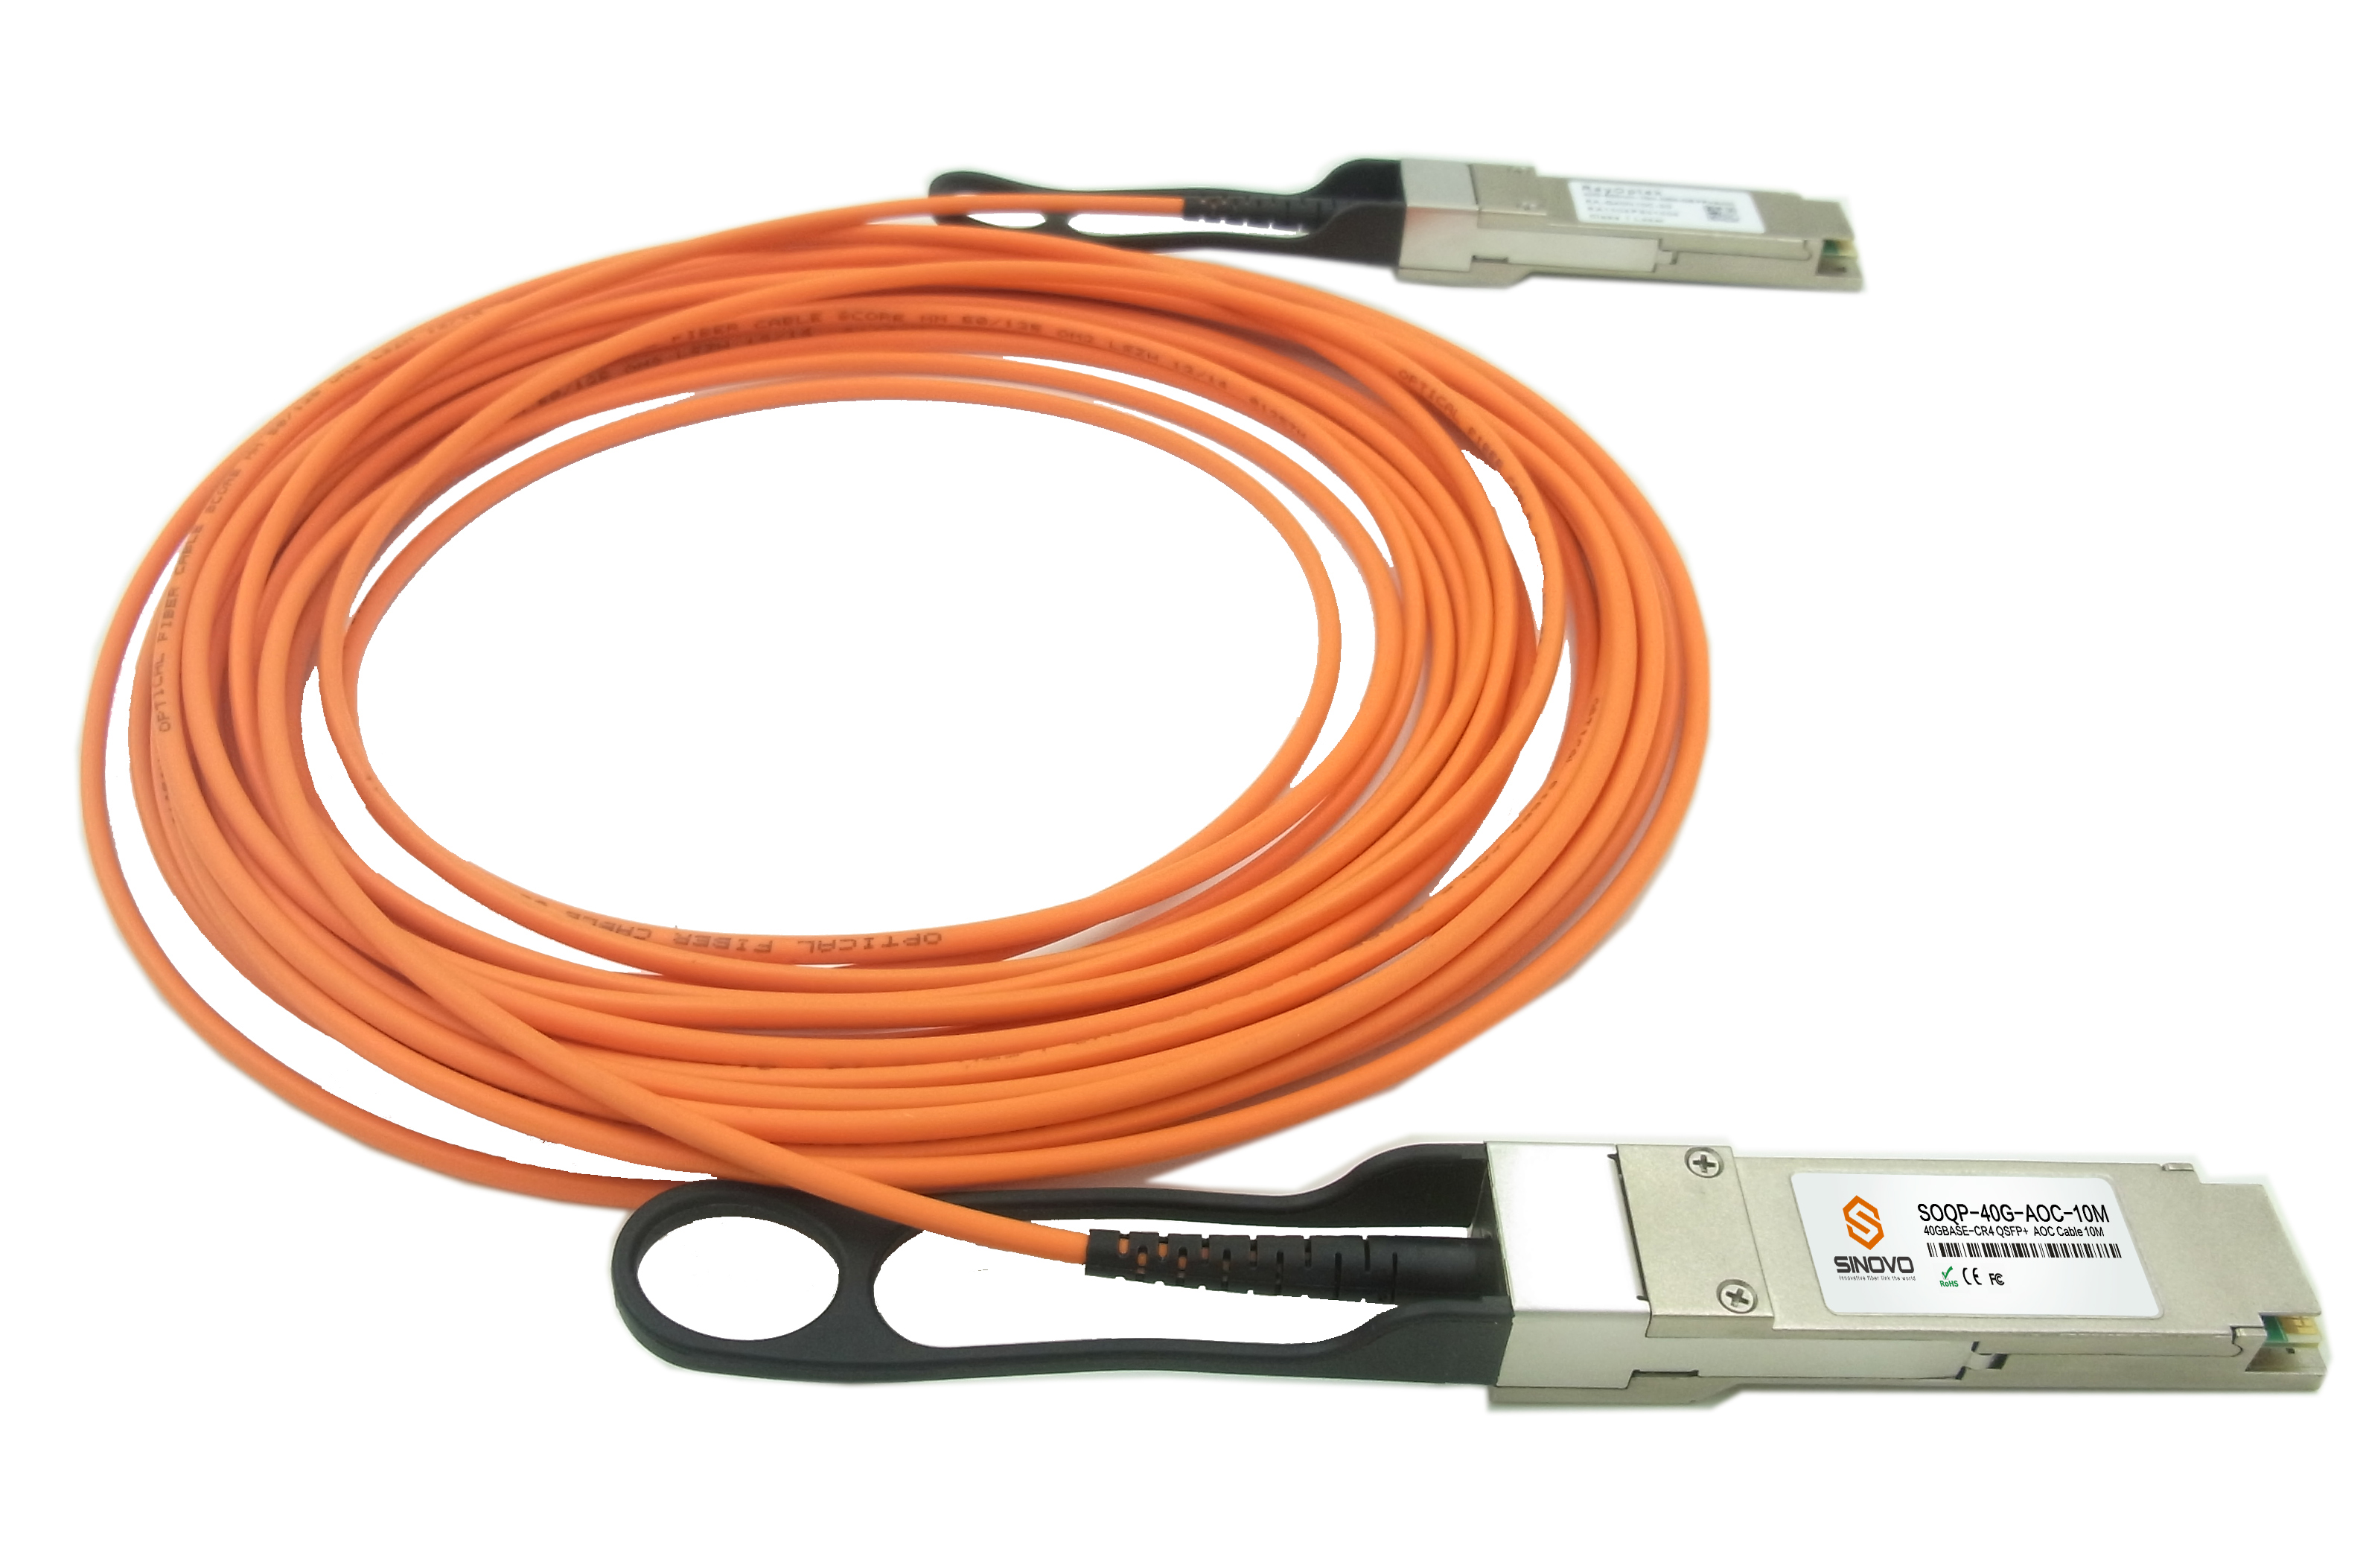 SINOVO Release out  4*SFP+ AOC Cable